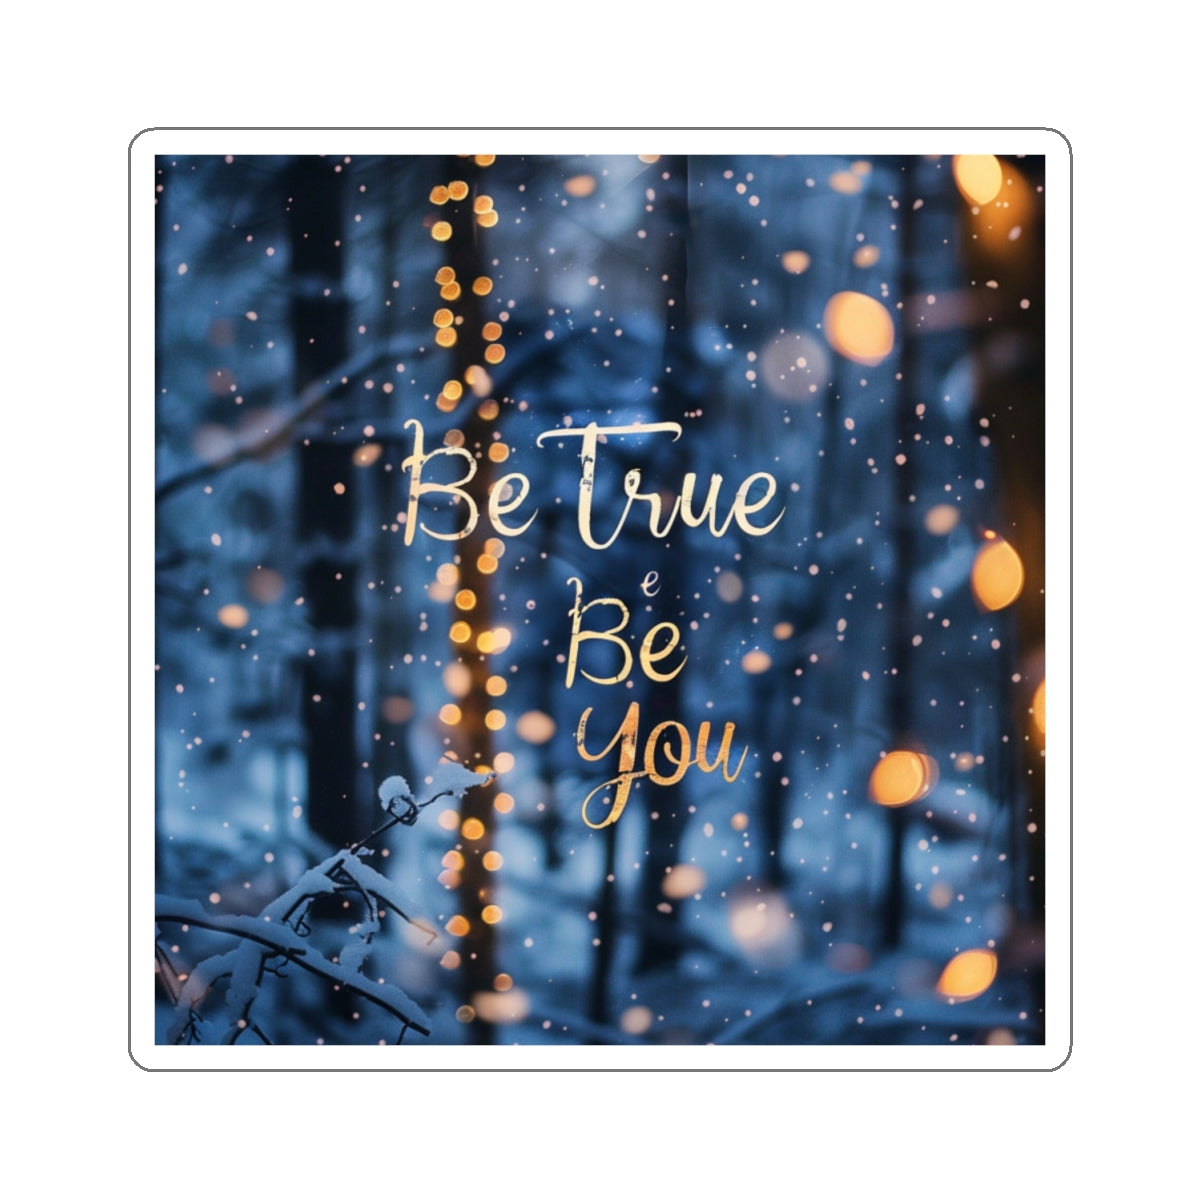 Kiss-Cut Stickers - Be true be you